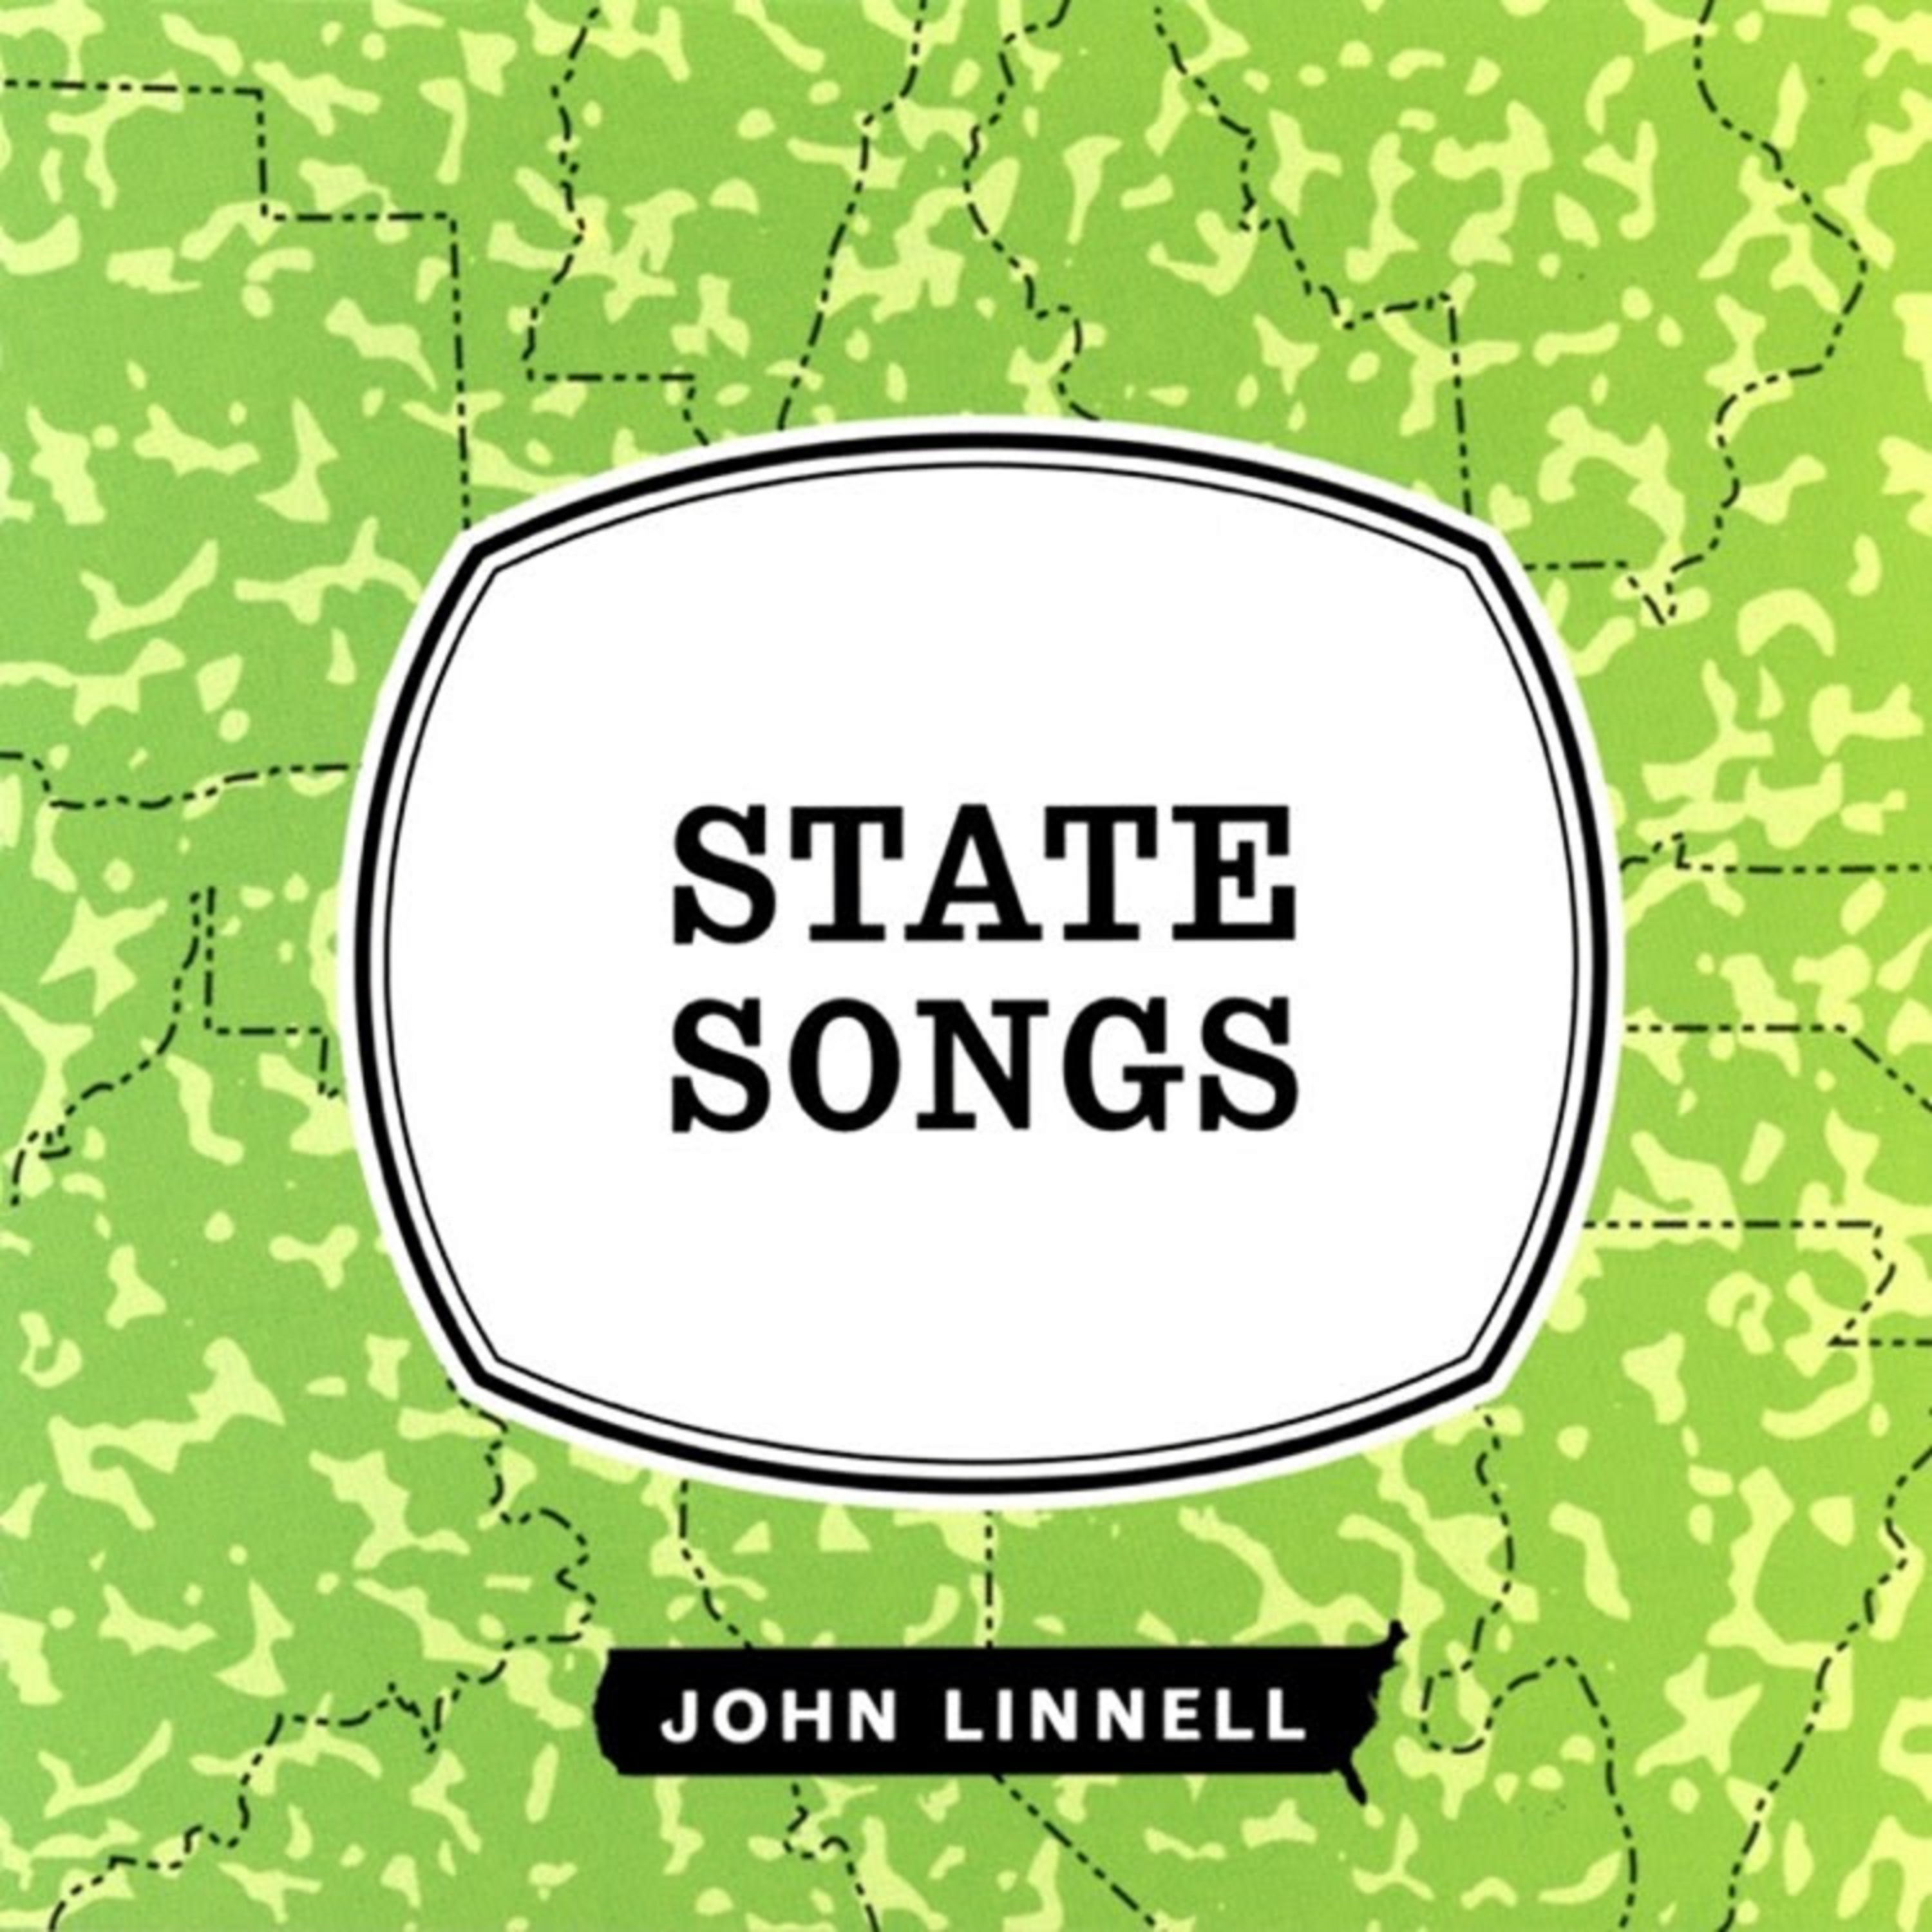 Expanded digital edition of ‘State Songs’ from They Might Be Giants’ John Linnell out today